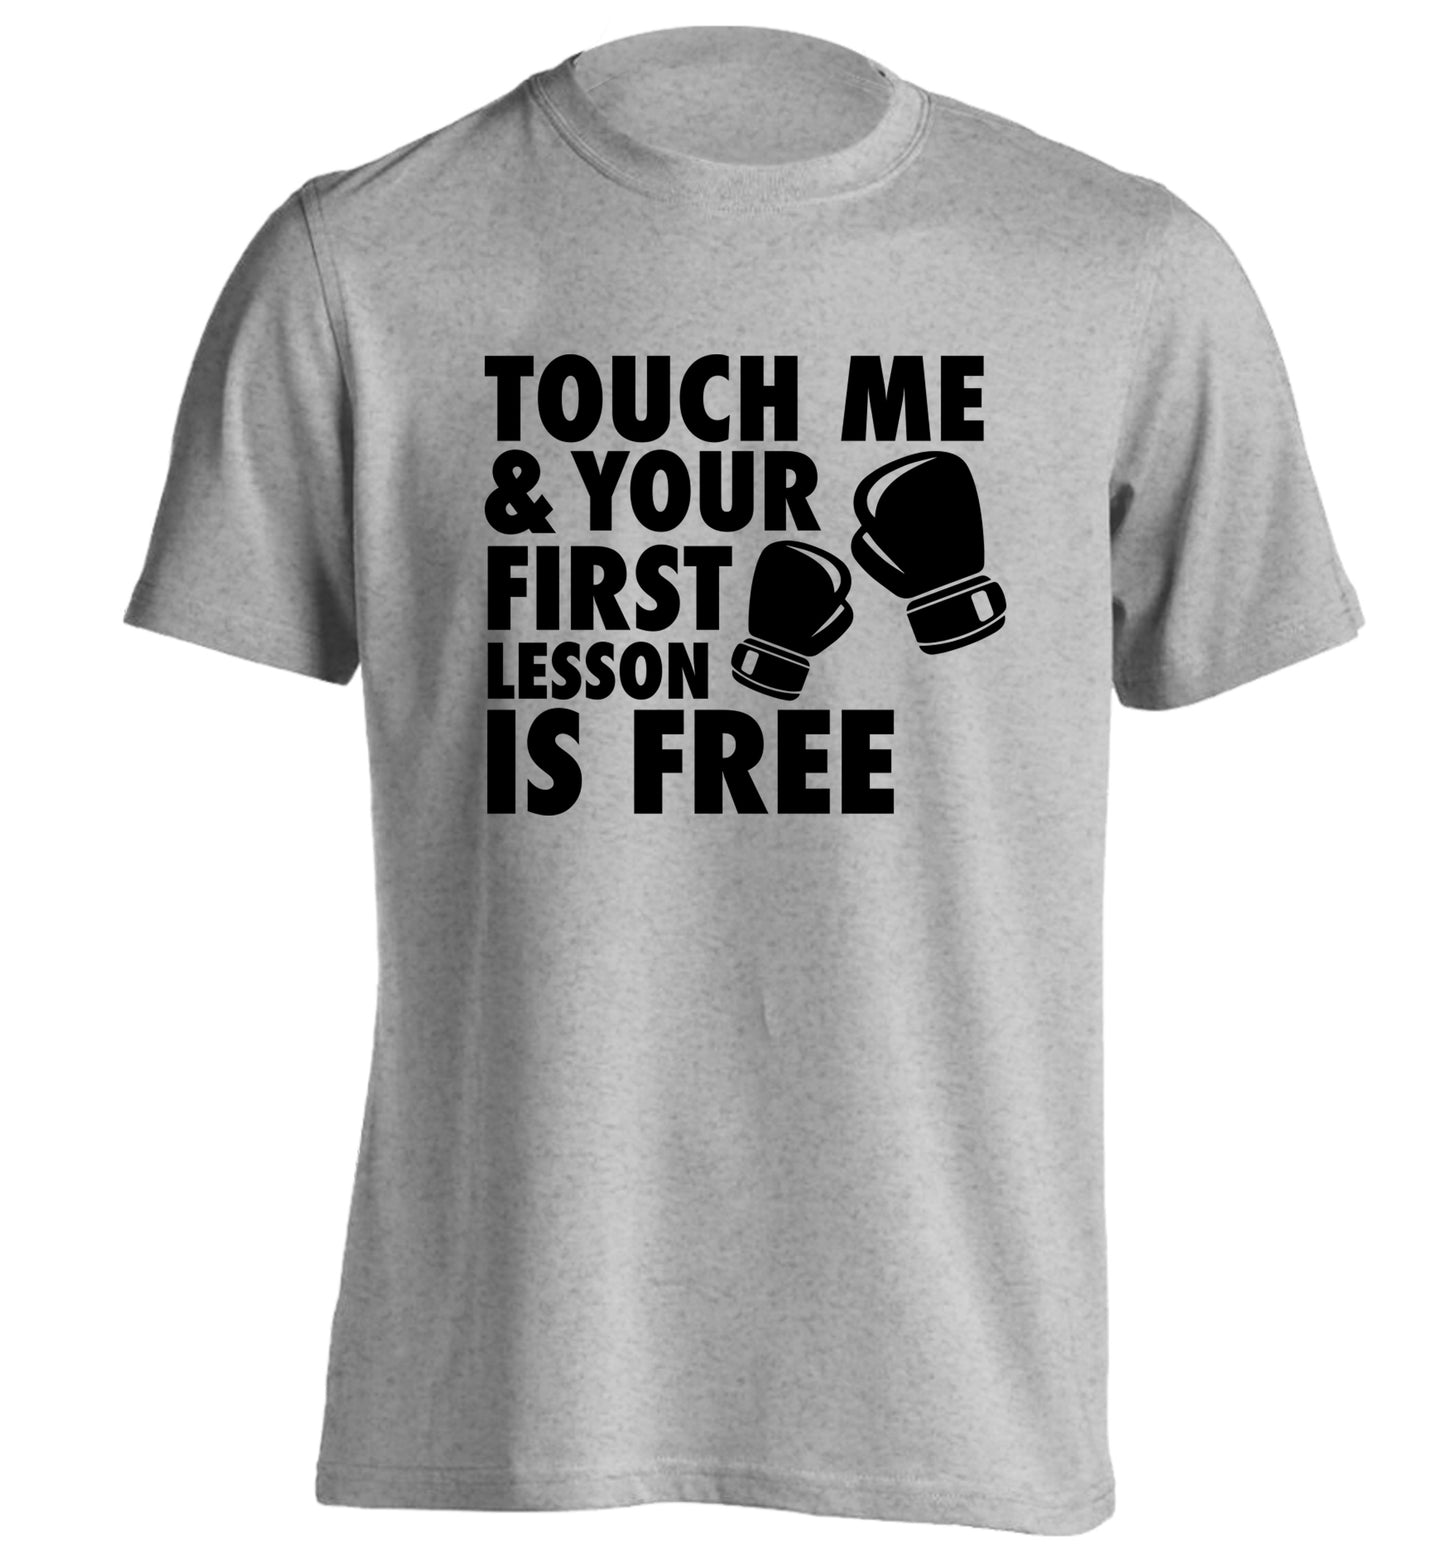 Touch me and your First Lesson is Free  adults unisex grey Tshirt 2XL